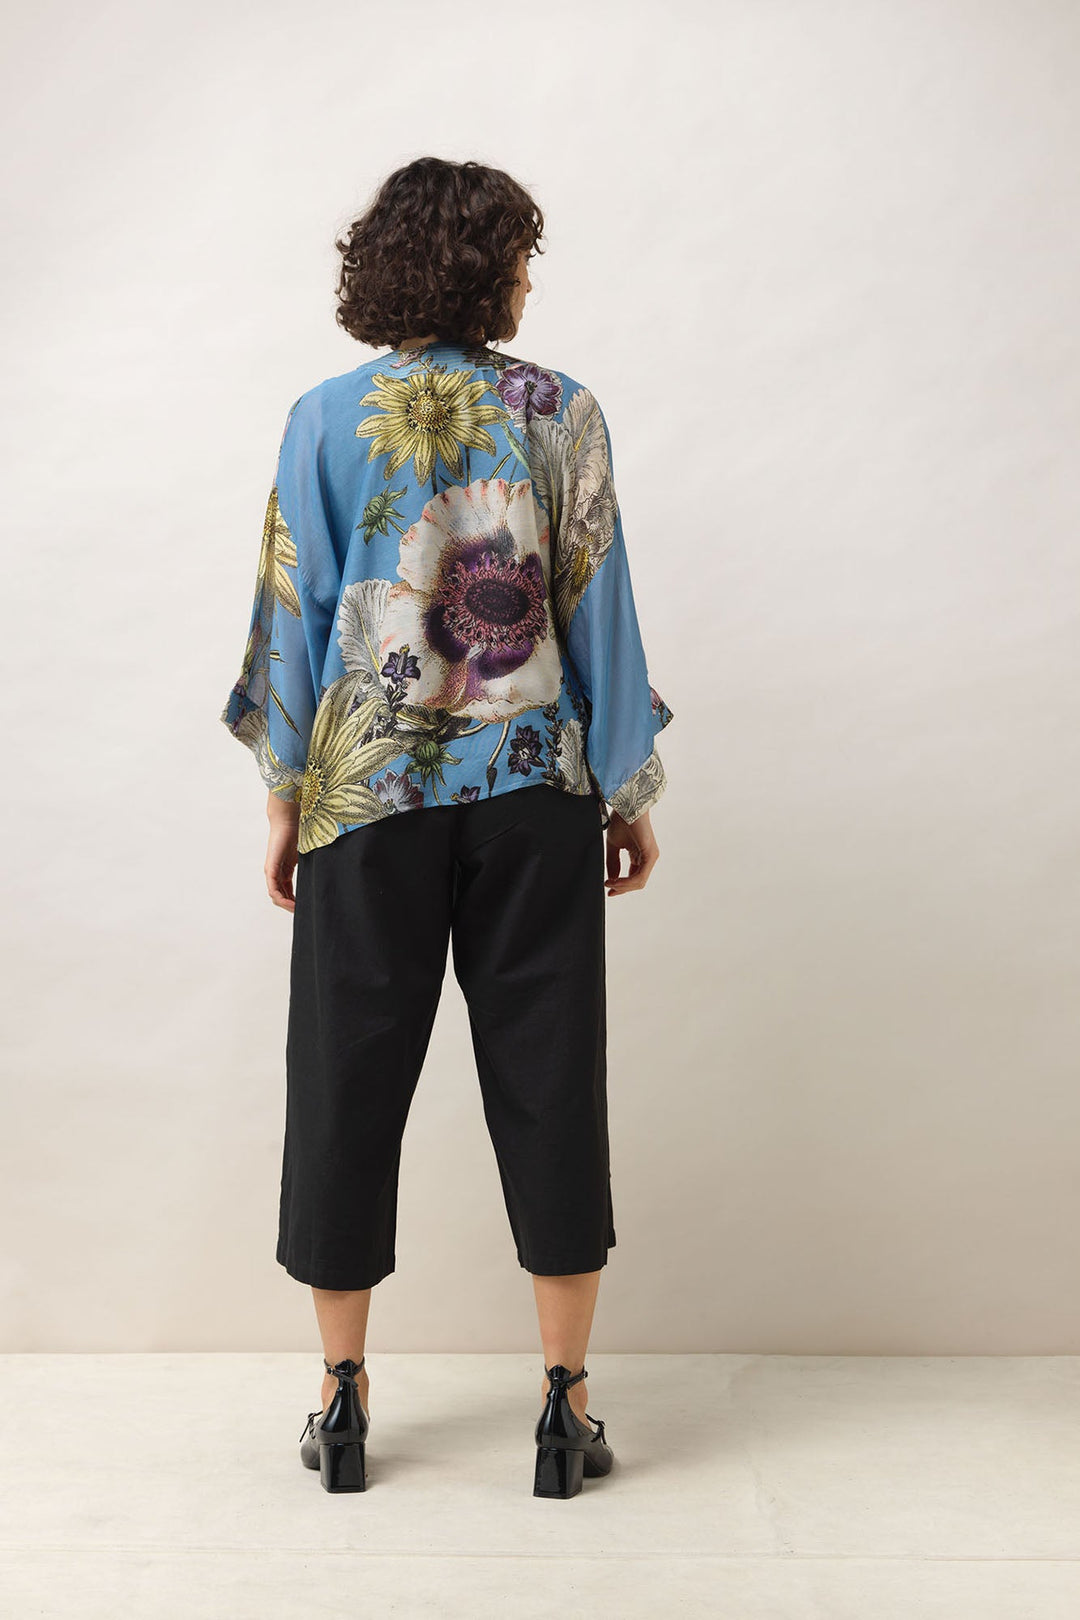 Women's short kimono in cornflower blue with daisy floral print by One Hundred Stars